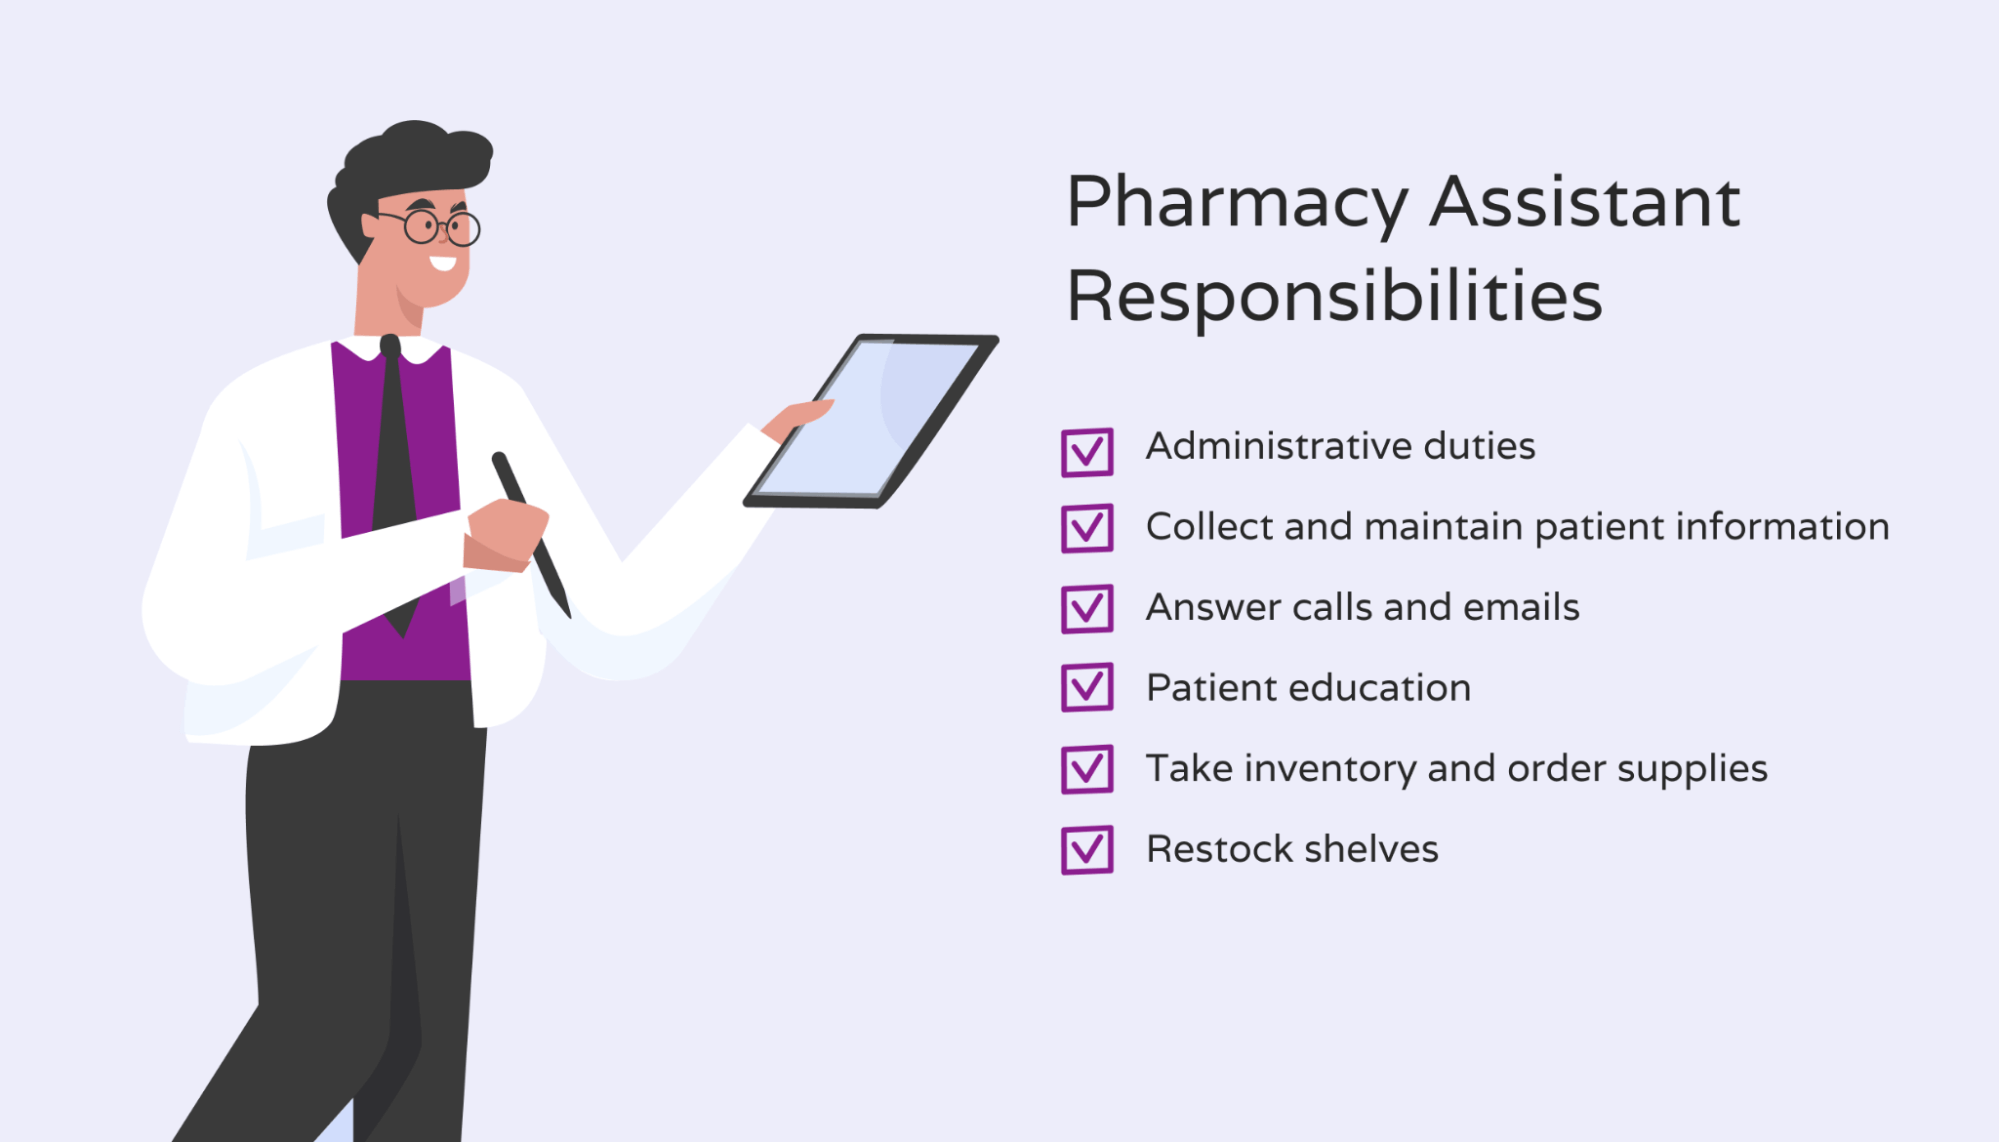 List of pharmacy assistant responsibilities.